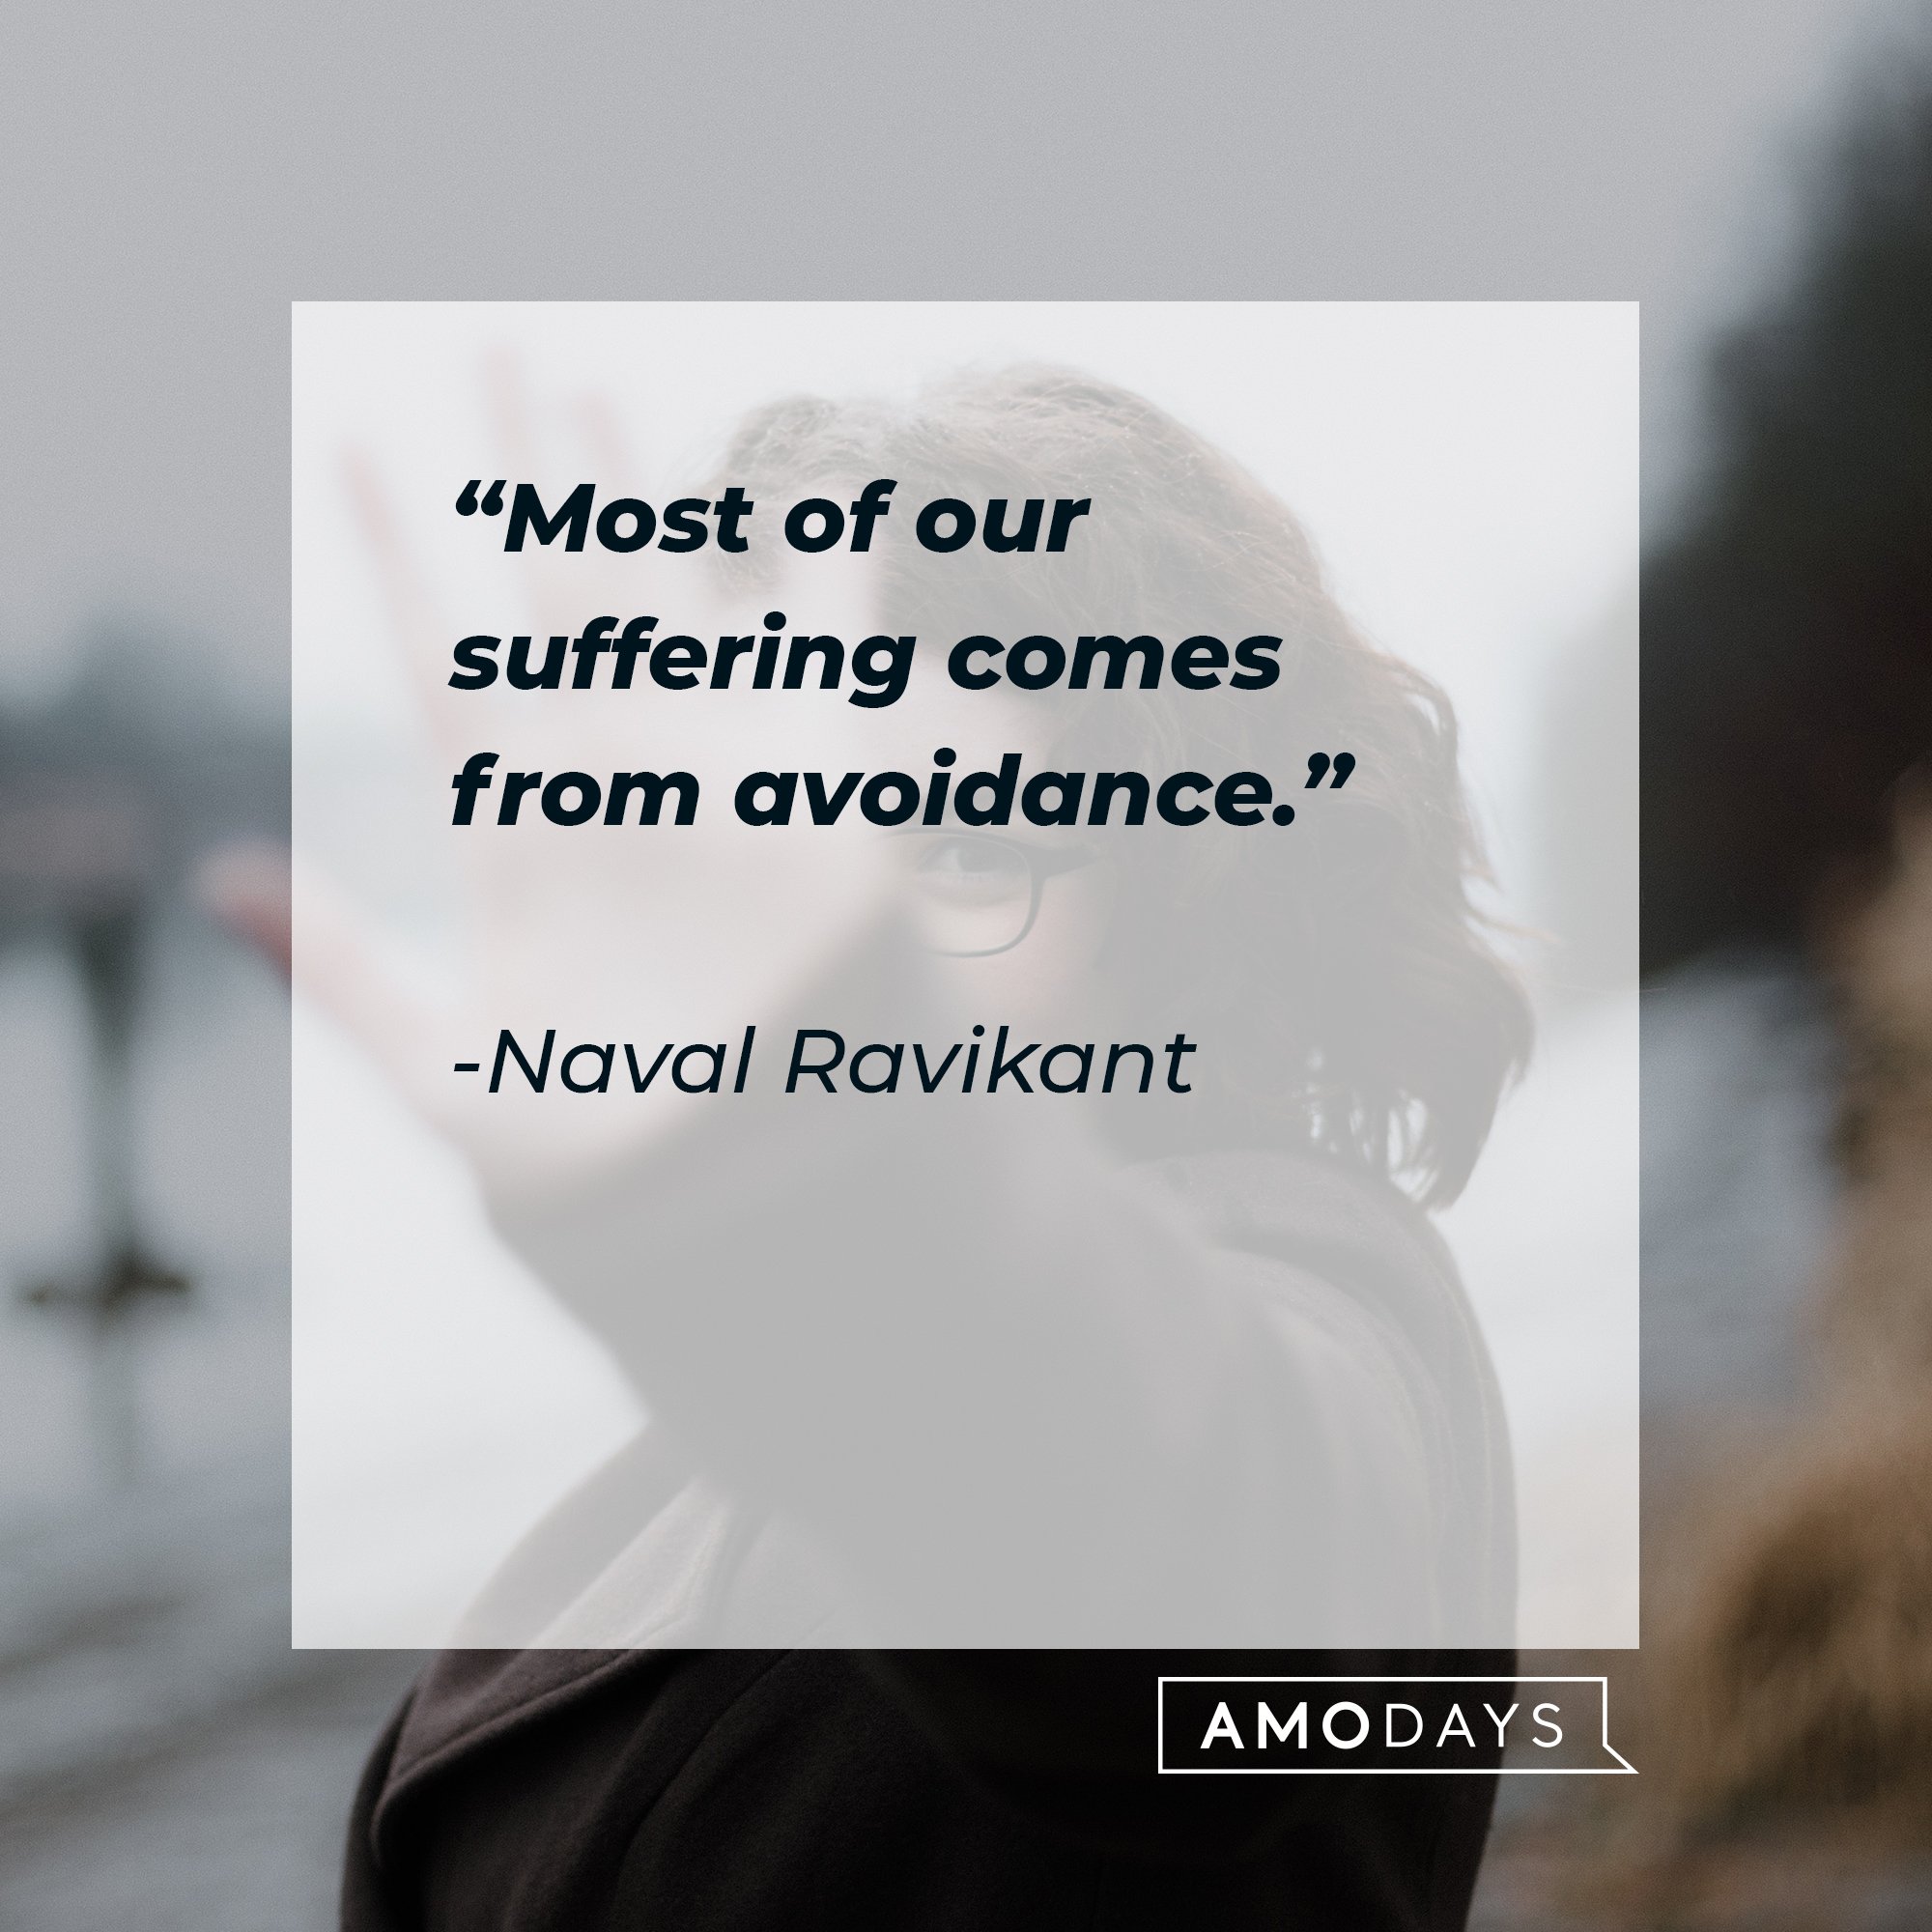 Naval Ravikant's quote: "Most of our suffering comes from avoidance." | Image: AmoDays